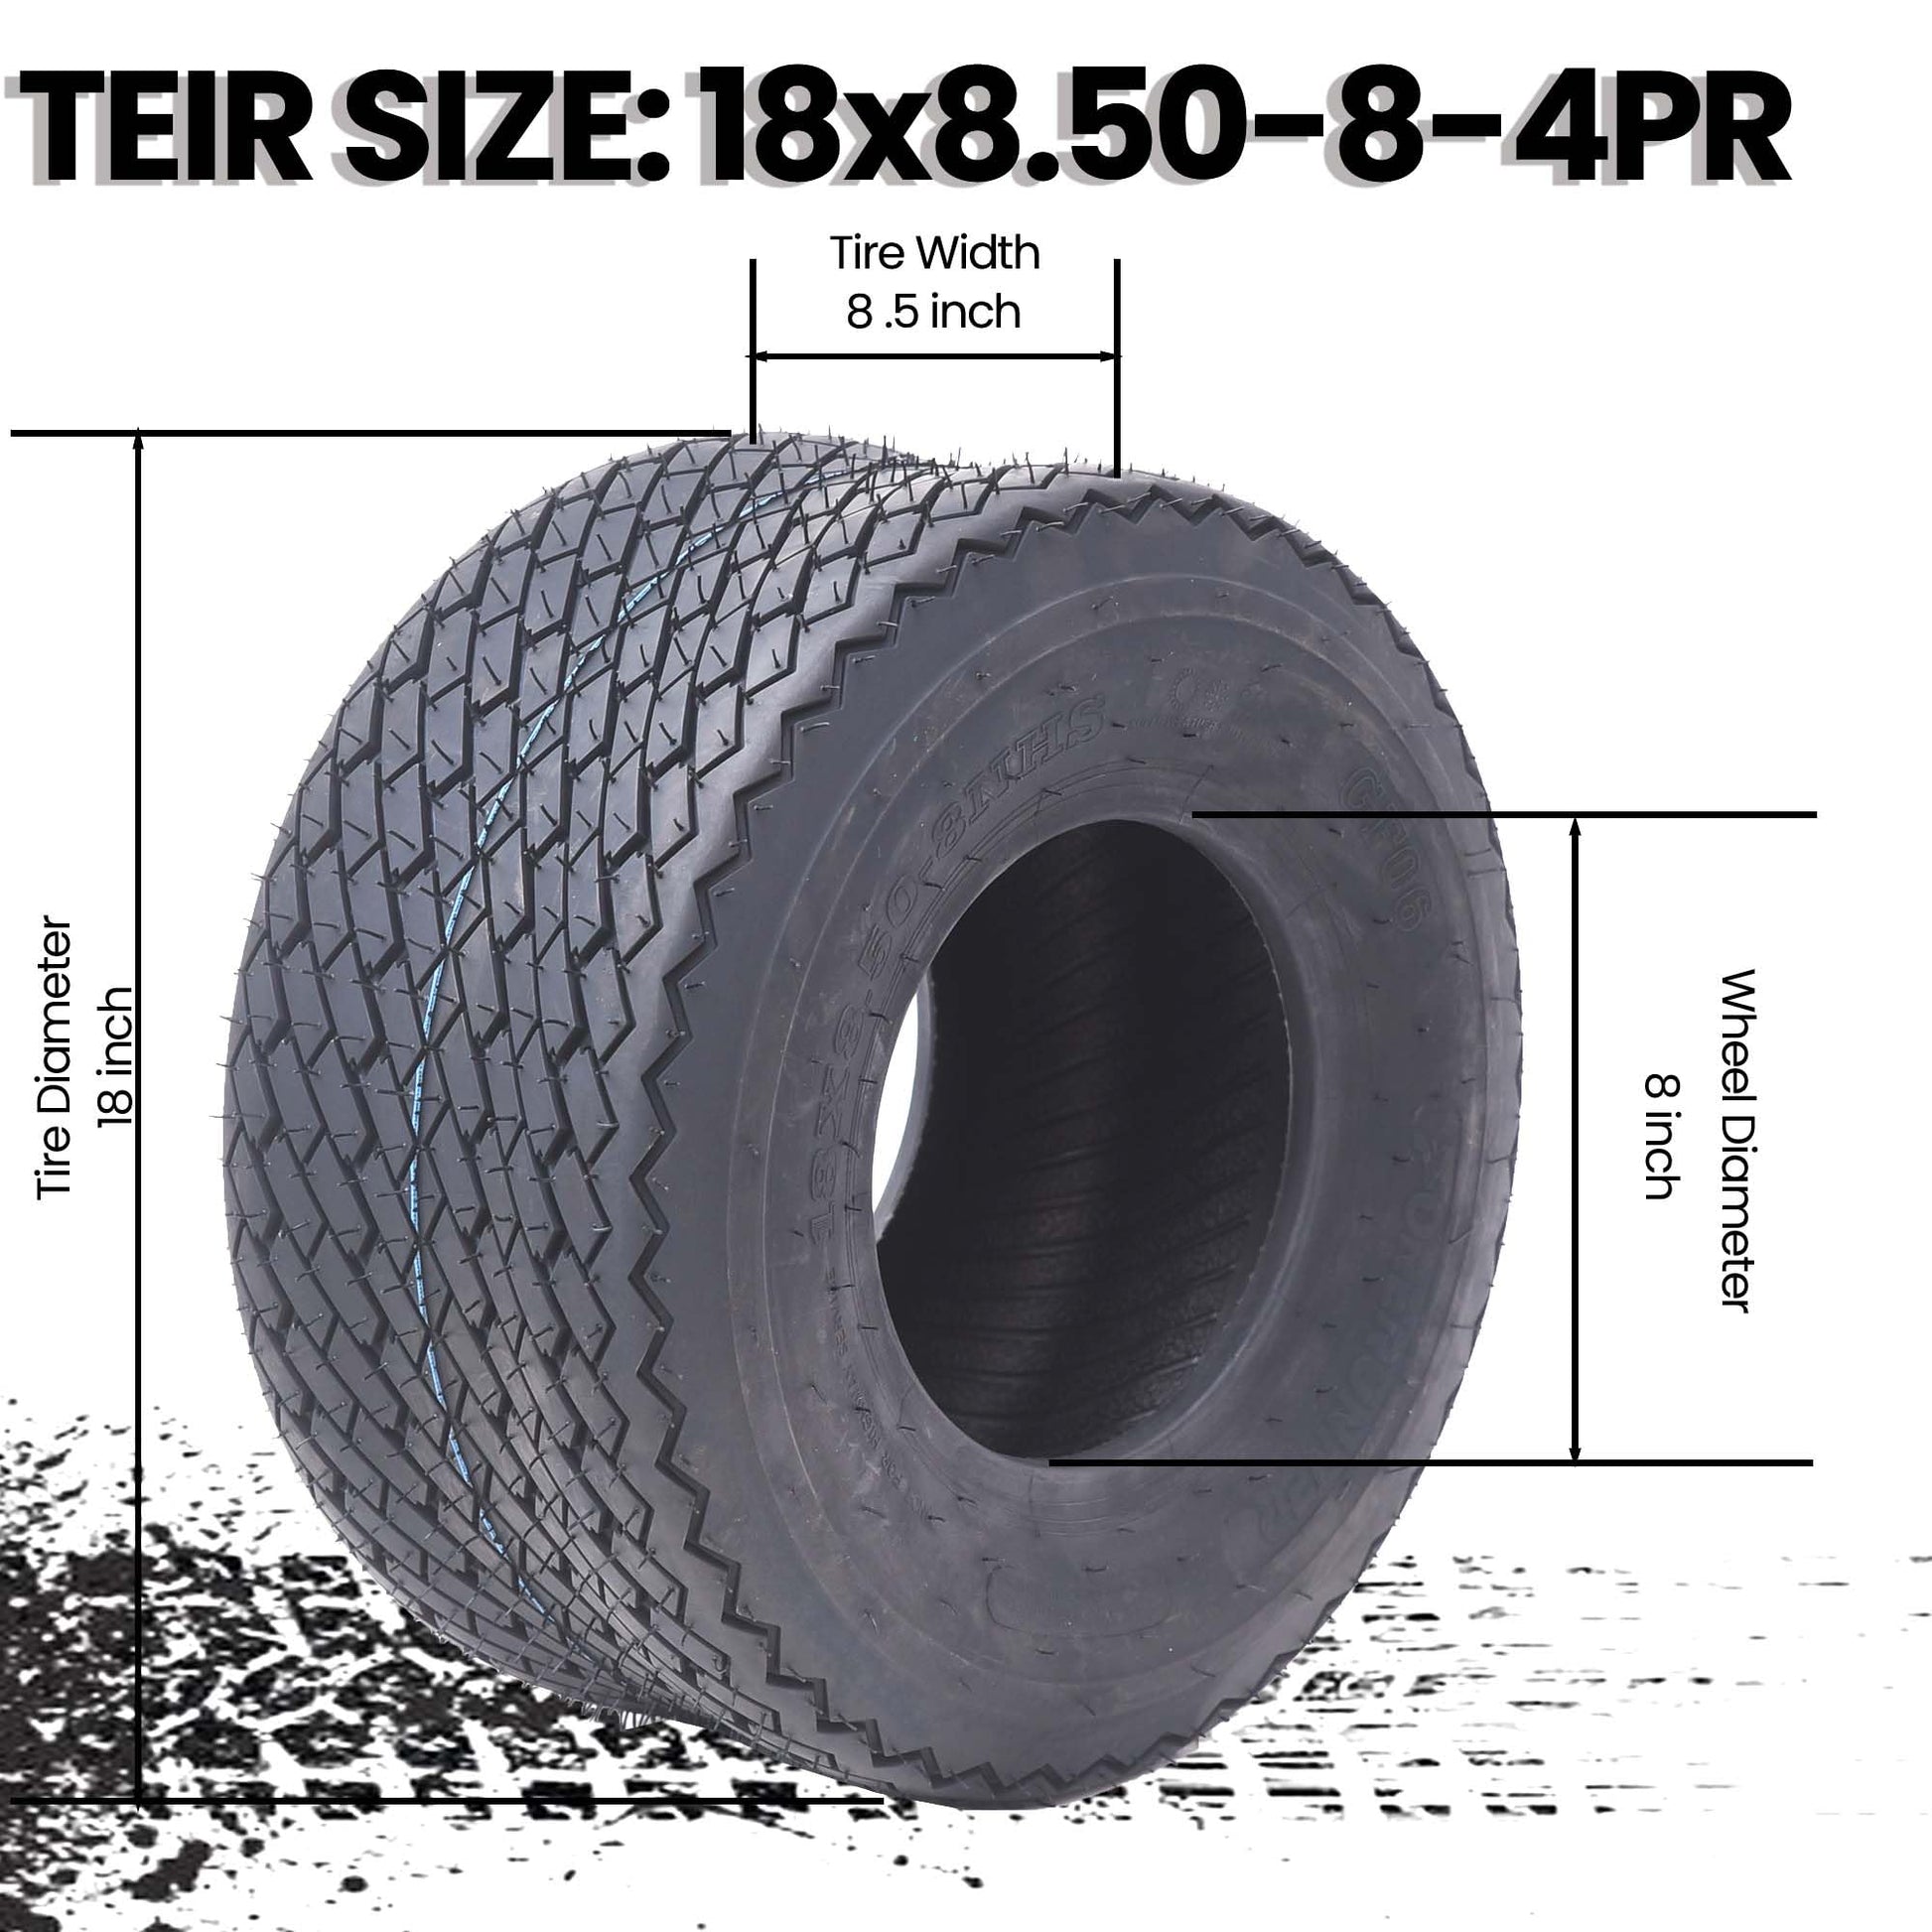 Lawn Mower Tires Turf Tires 20x8.00-8 4PR for Golf Cart Tires, Garden Tractor Riding Mower Tubeless Set of 2